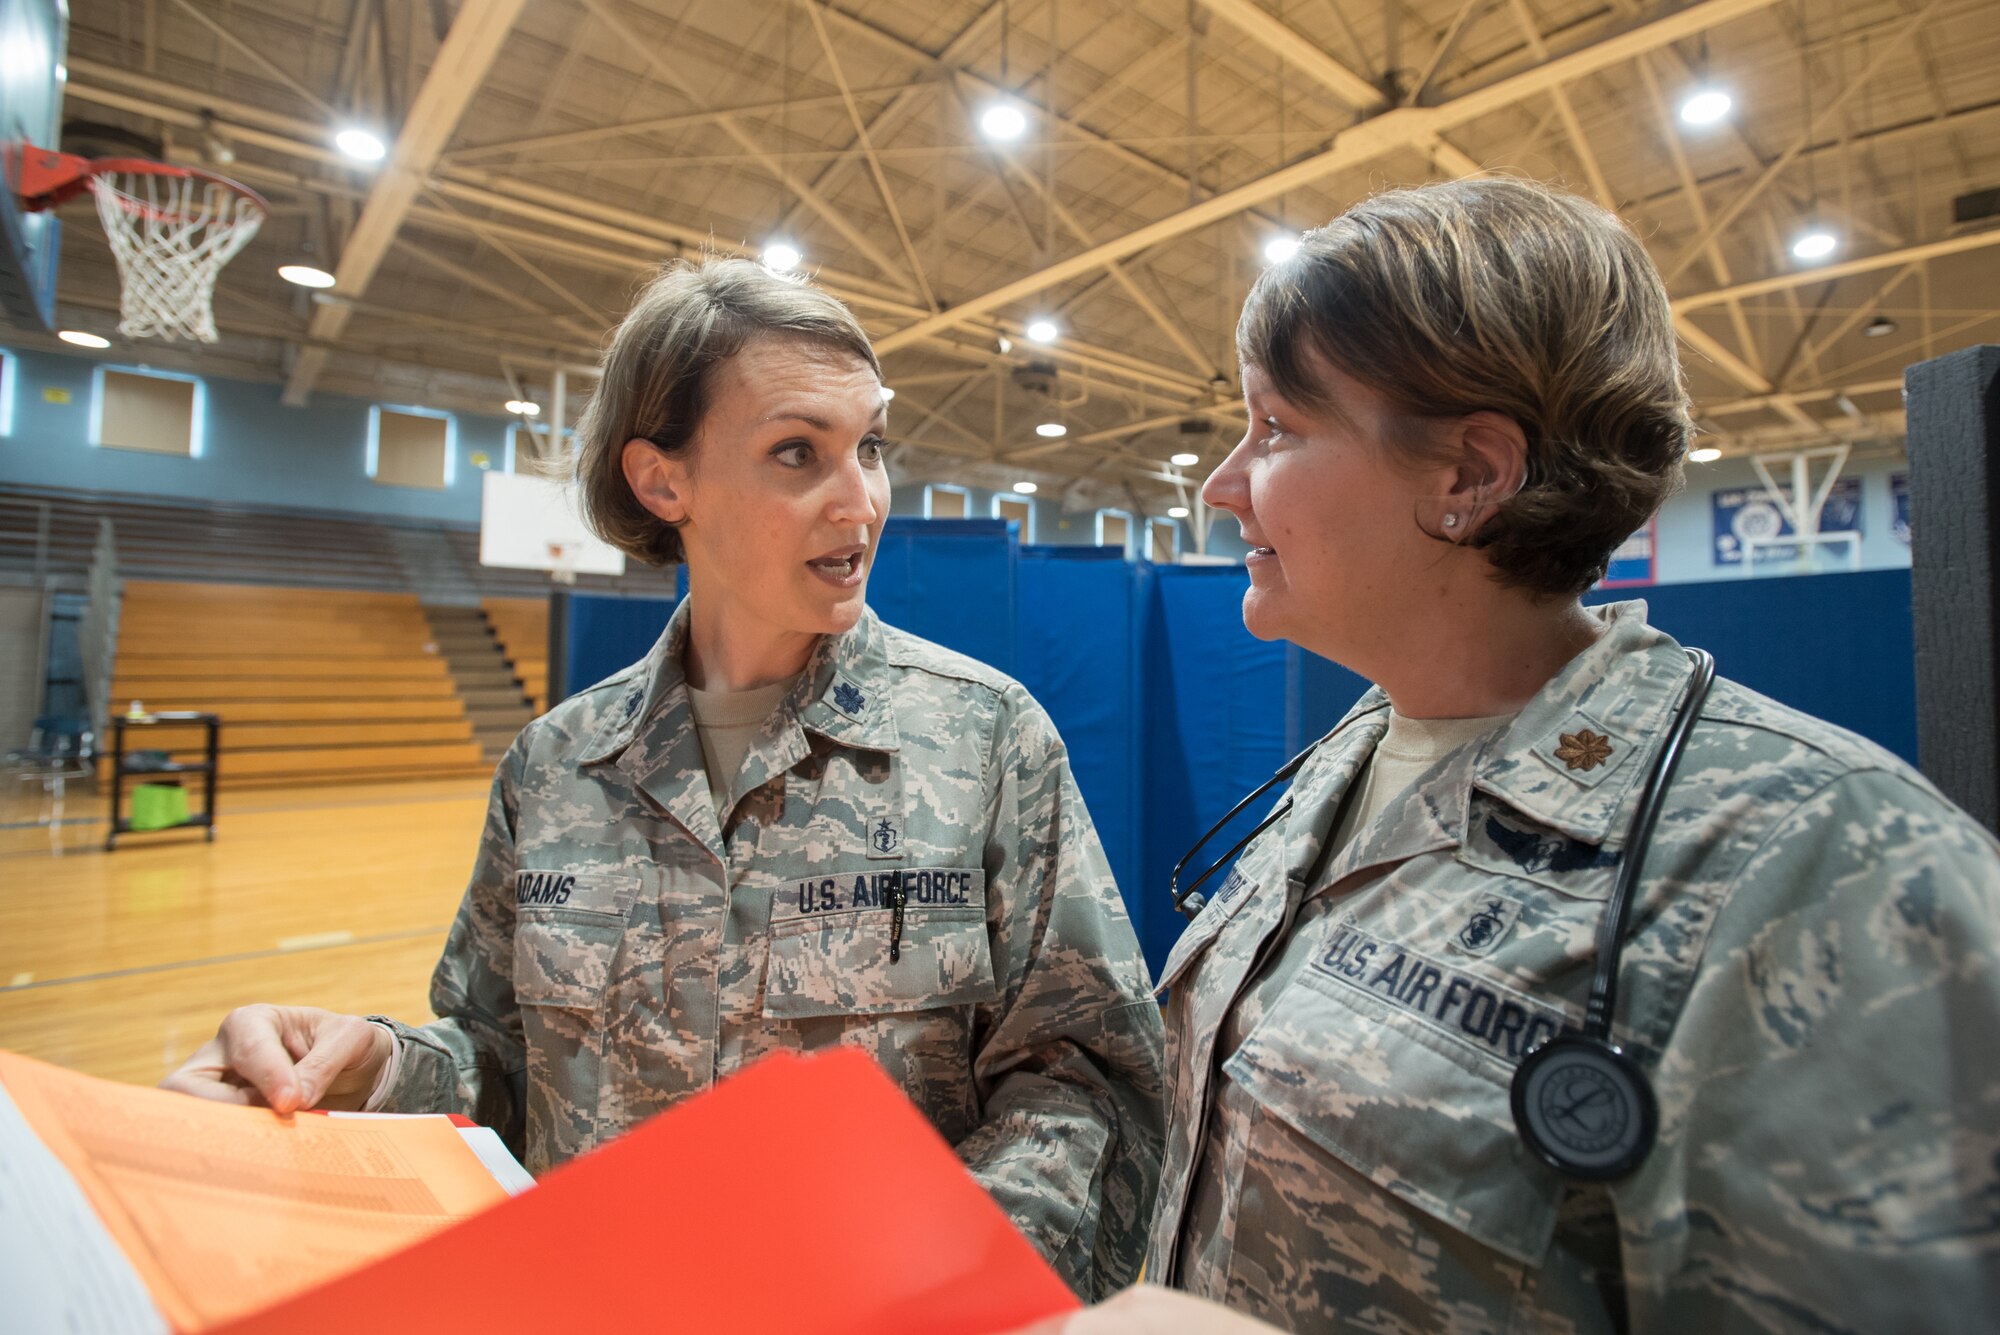 U.S. Air Force Lt. Col. Patricia Adams (left), an optometrist from the Kentucky Air National Guard’s 123rd Airlift Wing, discusses patient care with U.S. Air Force Maj. Tiffany Hubbard, a nurse practitioner, at a health-care clinic being run by the Air Guard and U.S. Navy Reserve at Lee County High School in Beattyville, Ky., June 20, 2018. The Beattyville clinic is one of four that comprised Operation Bobcat, a 10-day mission to provide military medical troops with crucial training in field operations and logistics while offering no-cost health care to the residents of Eastern Kentucky. The clinics, which operated from June 15-24, offered non-emergent medical care; sports physicals; dental cleanings, fillings and extractions; eye exams and no-cost prescription eye glasses. (U.S. Air National Guard photo by Lt. Col. Dale Greer)